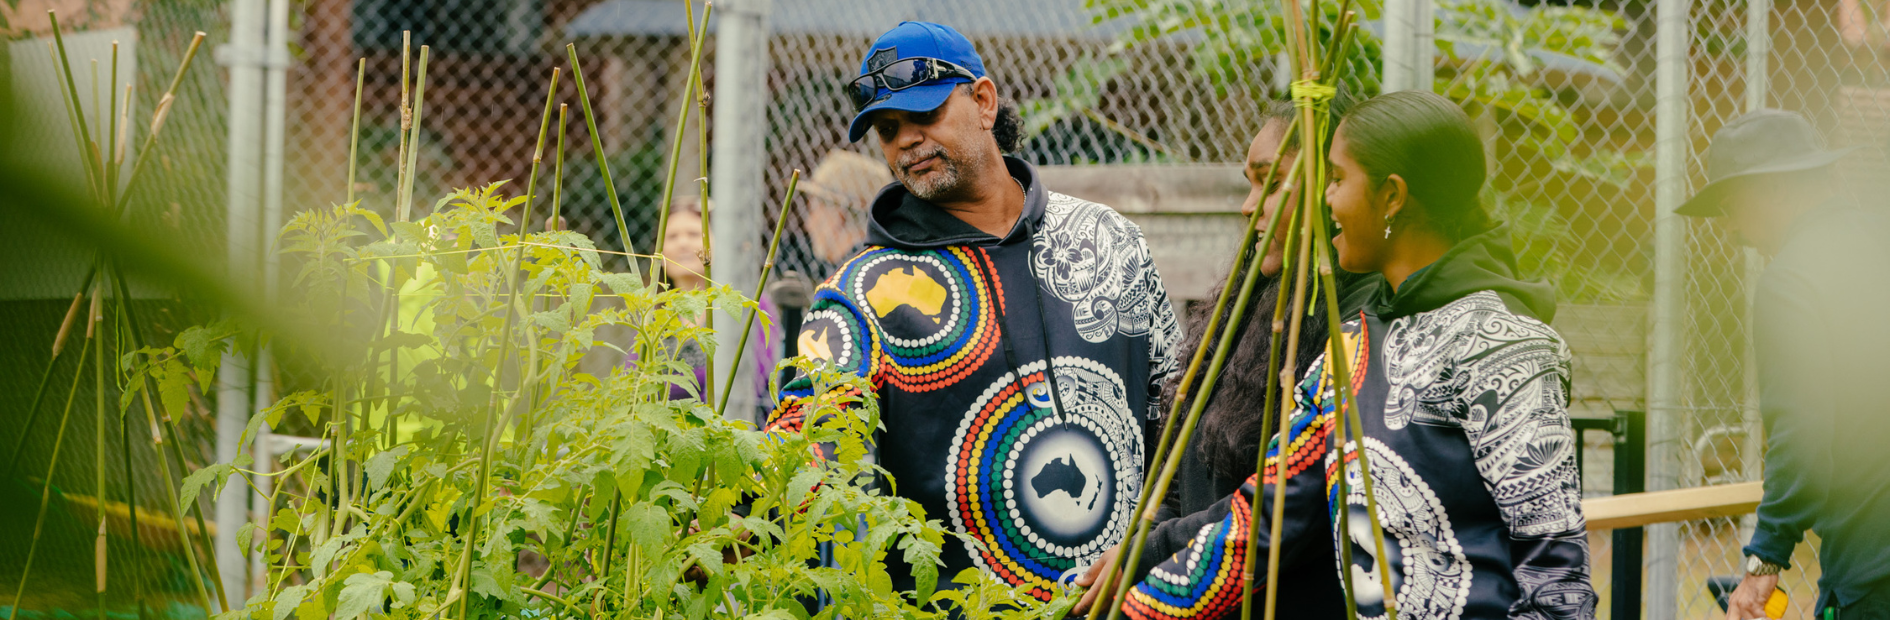 Man and two women dressed in colourful jumpers with indigenous prints on them chat and laugh in a vegetable garden